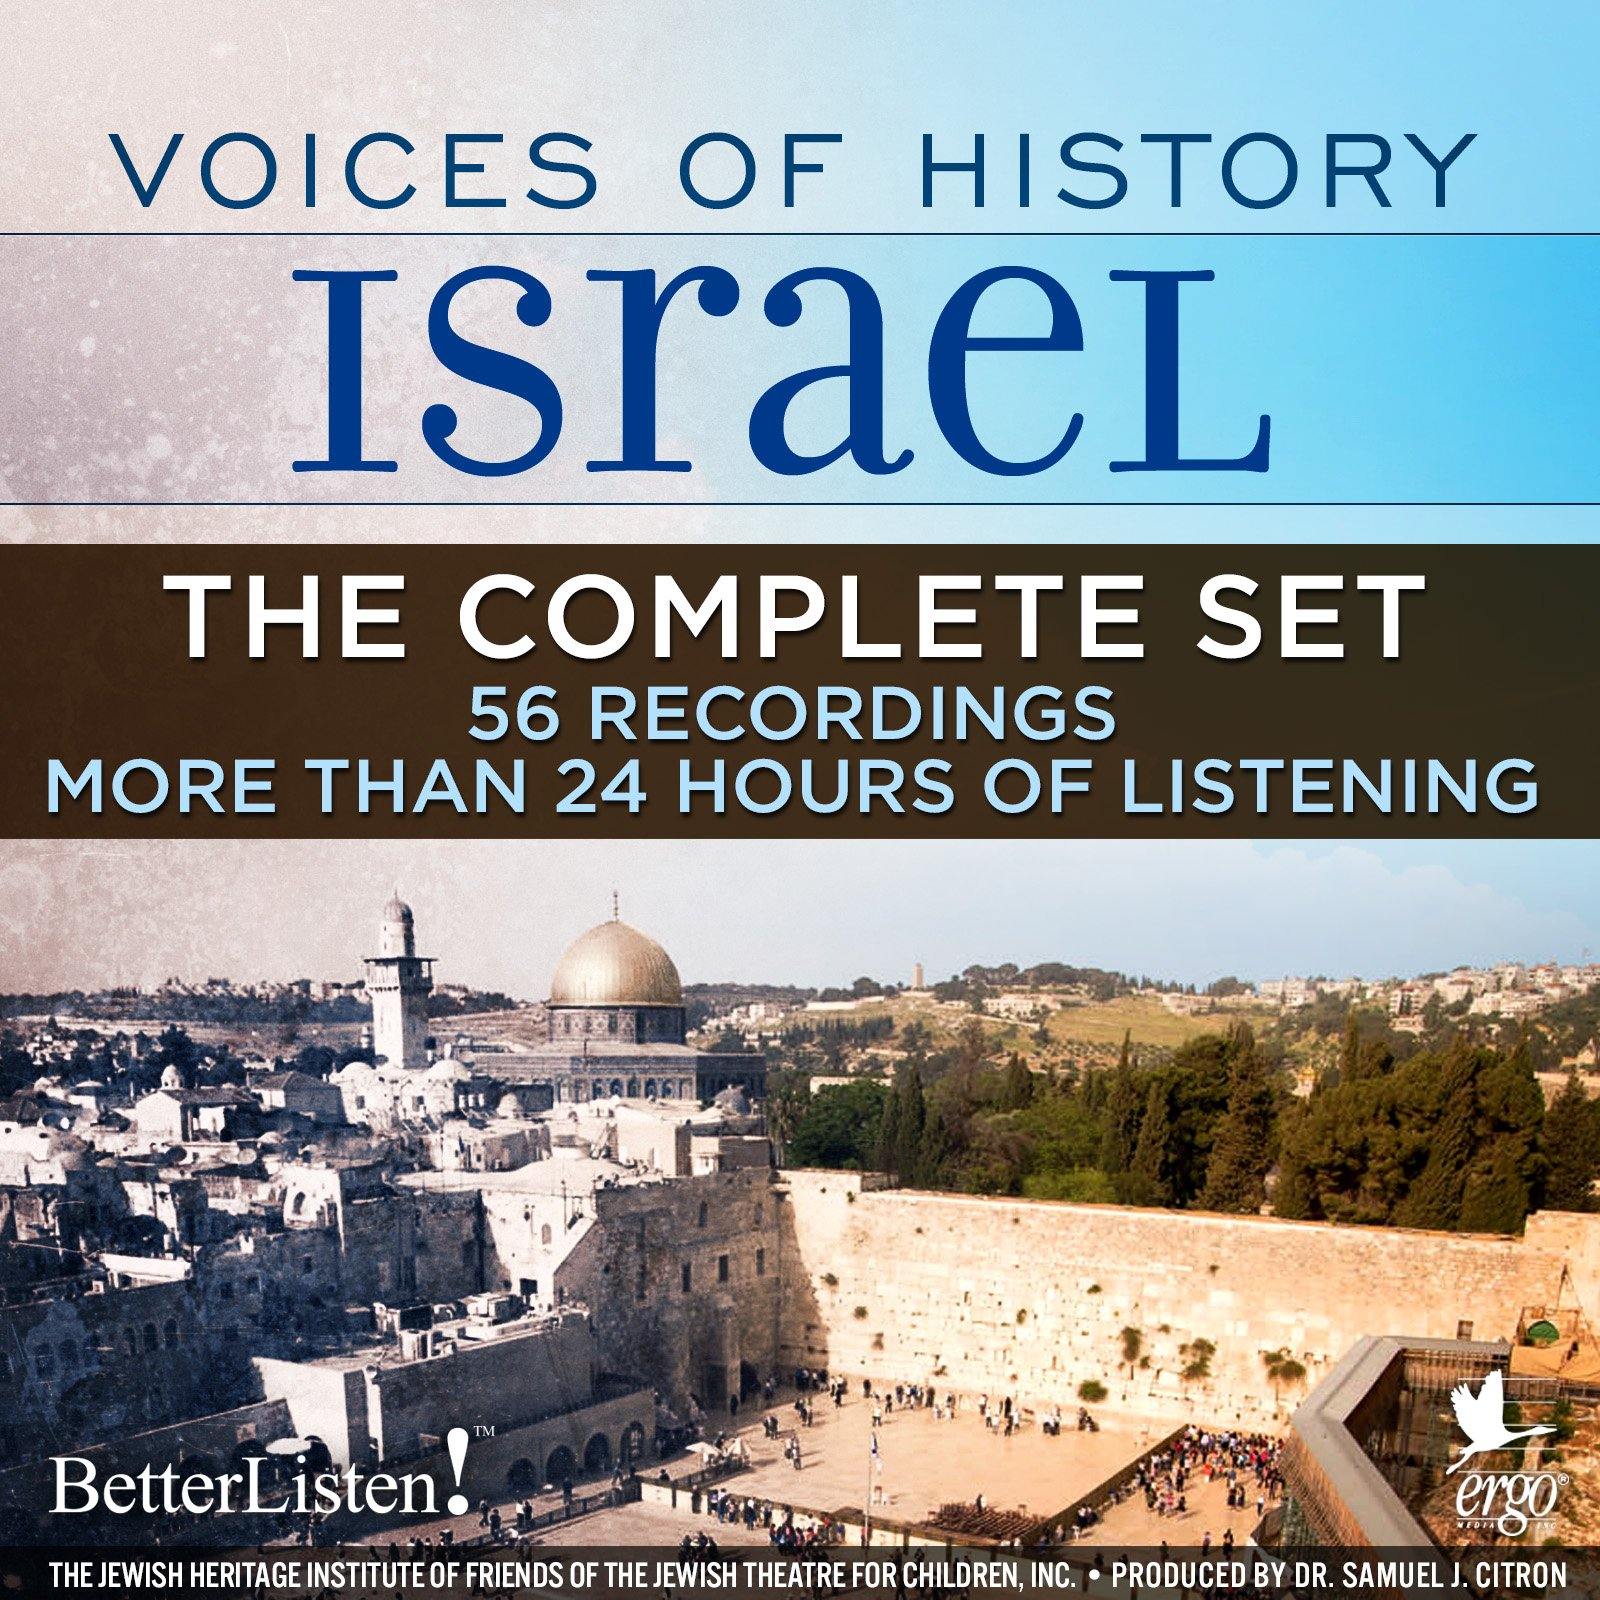 ONE TIME OFFER 50% OFF Voices of History Israel - Complete Set - BetterListen!